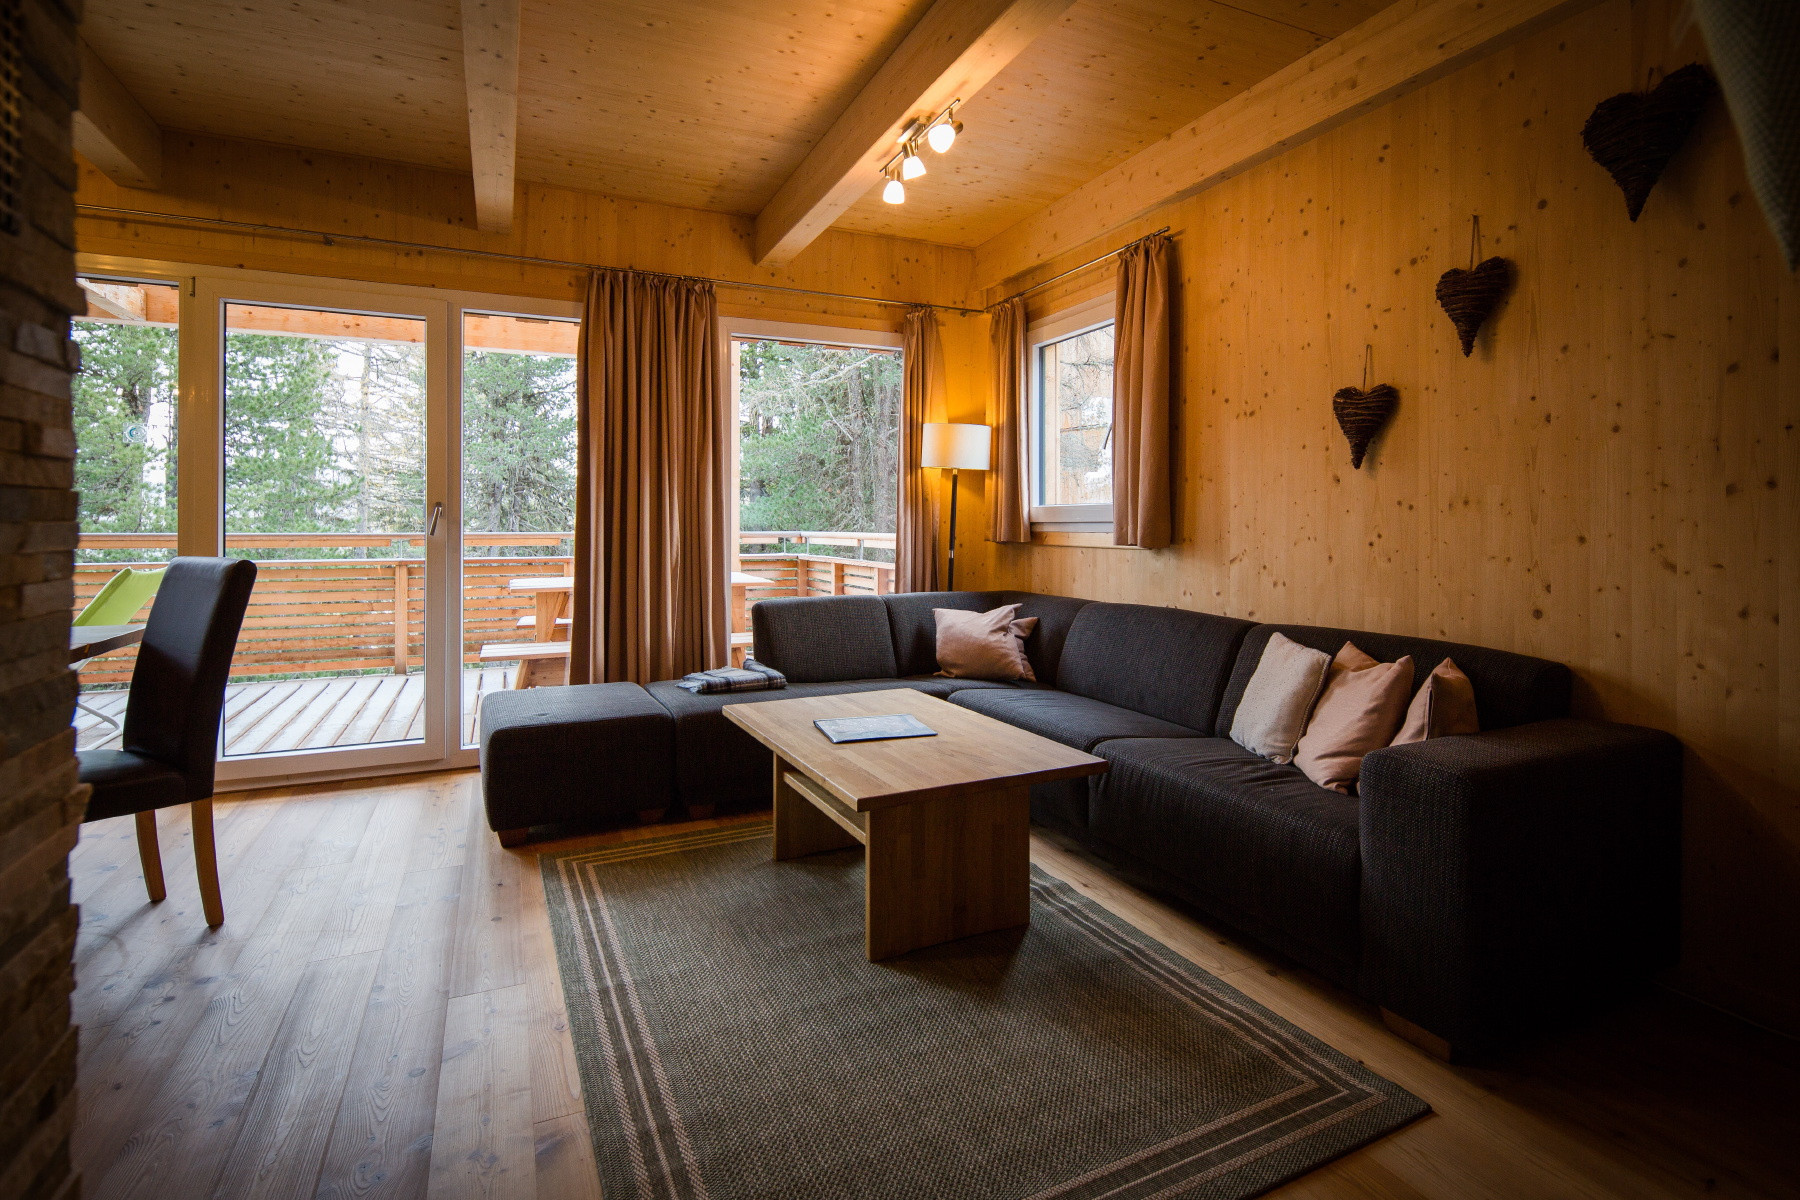  in Turrach - Chalet # 22 with sauna and indoor whirlpool